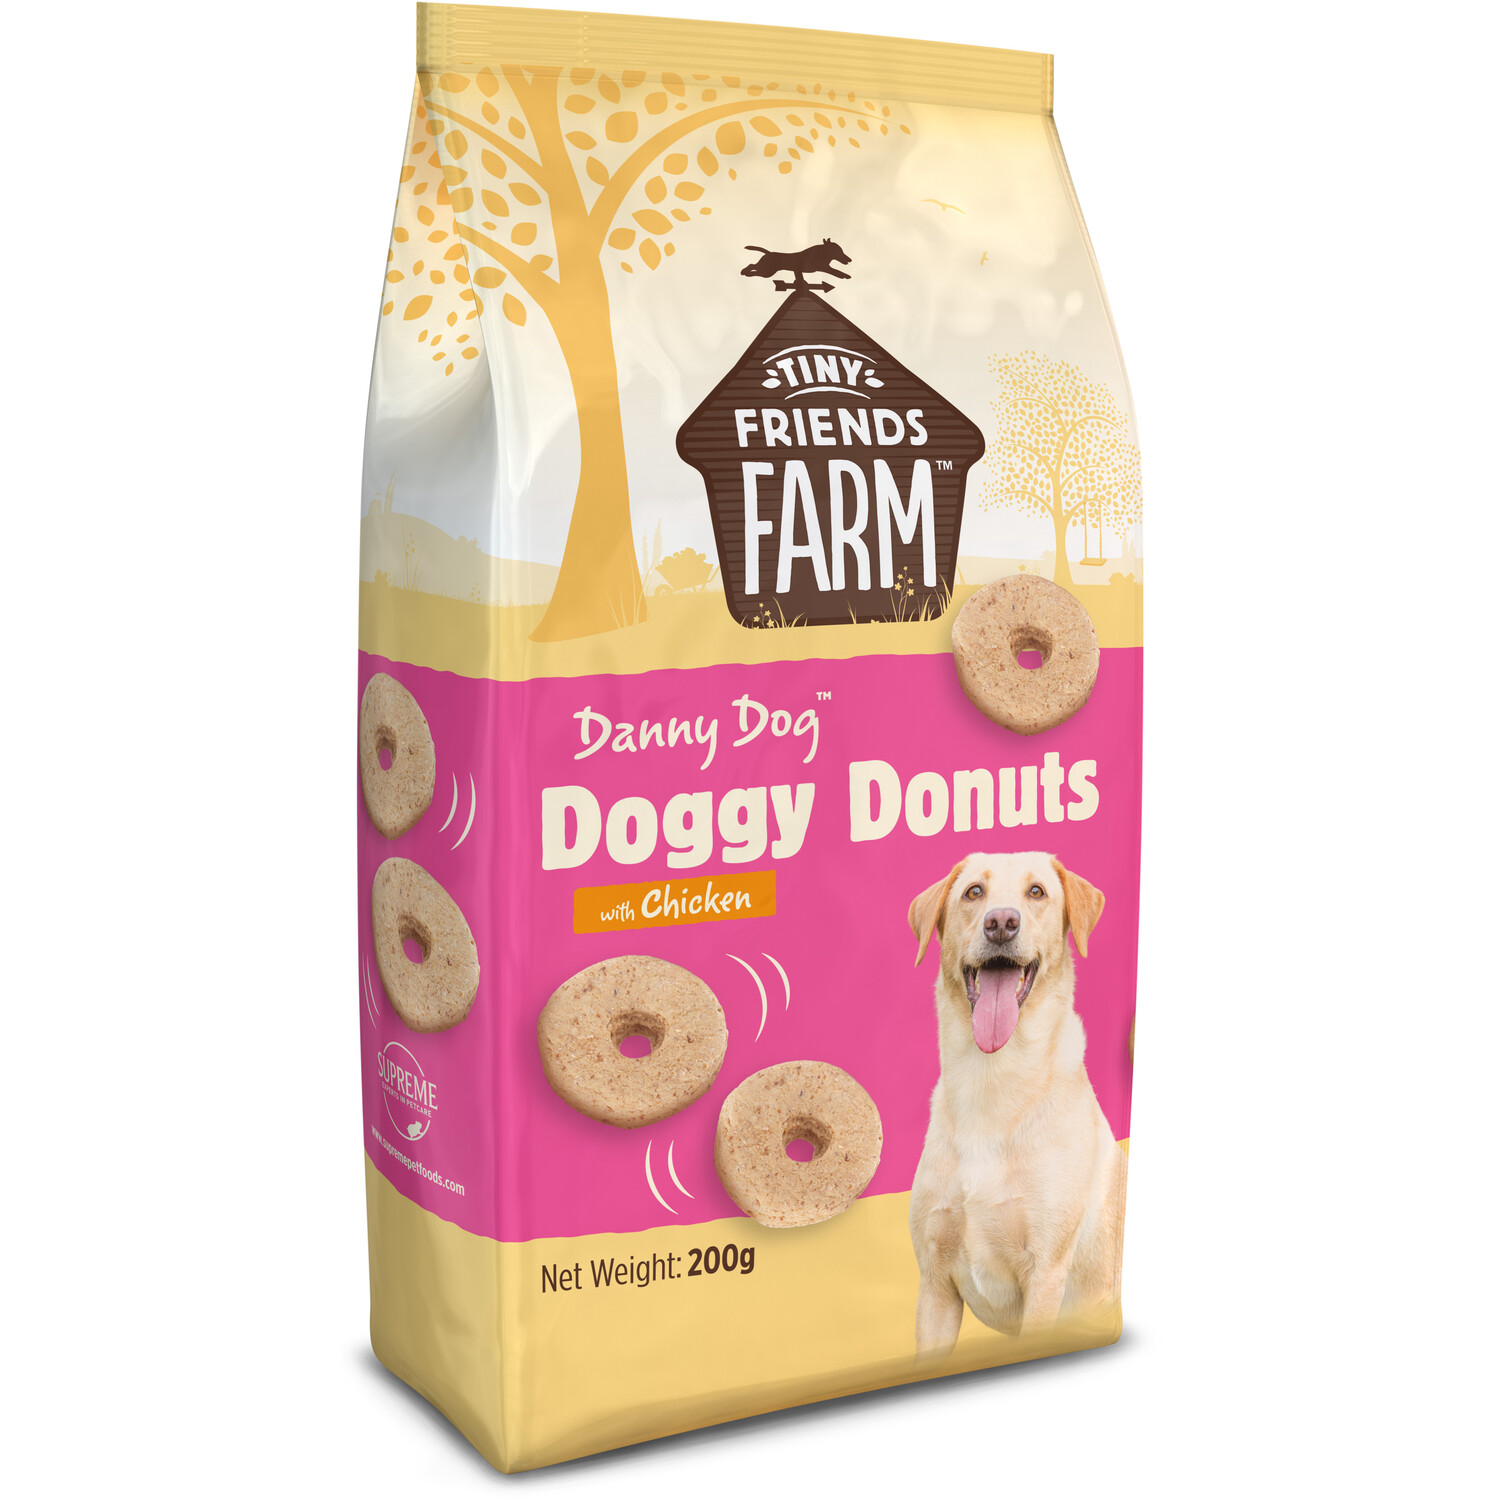 Doggy Donuts with Chicken Image 2